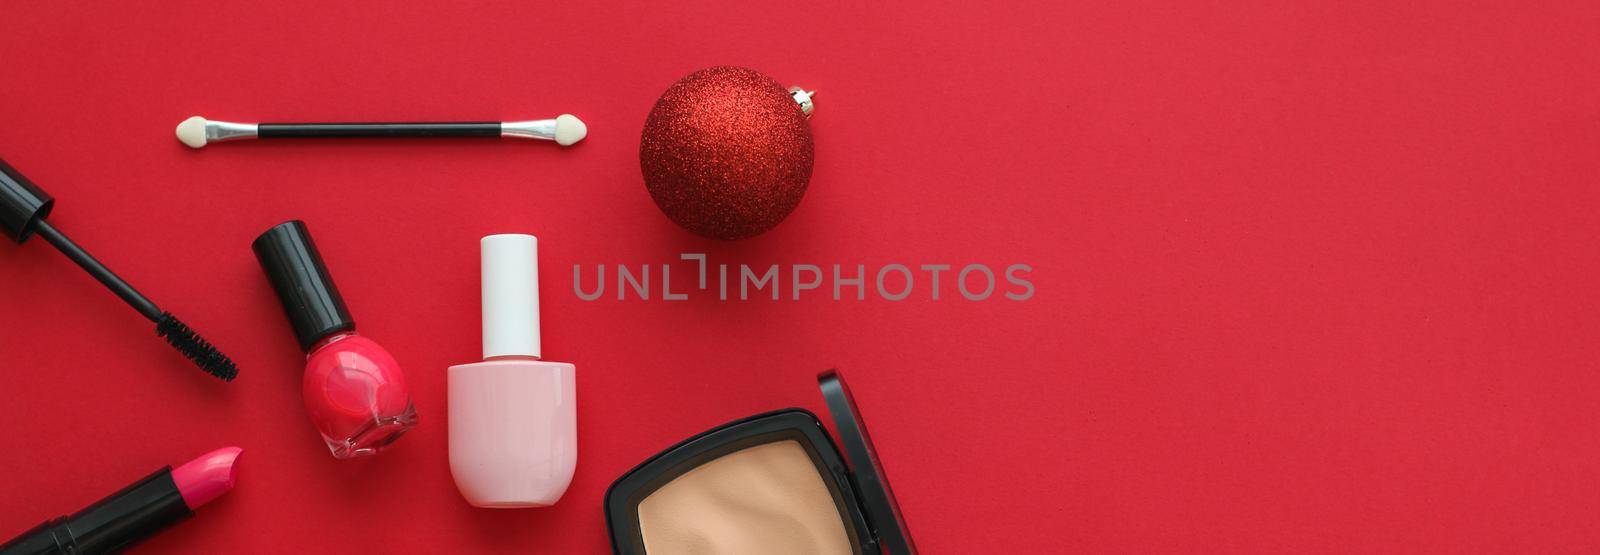 Make-up and cosmetics product set for beauty brand Christmas sale promotion, luxury red flatlay background as holiday design by Anneleven